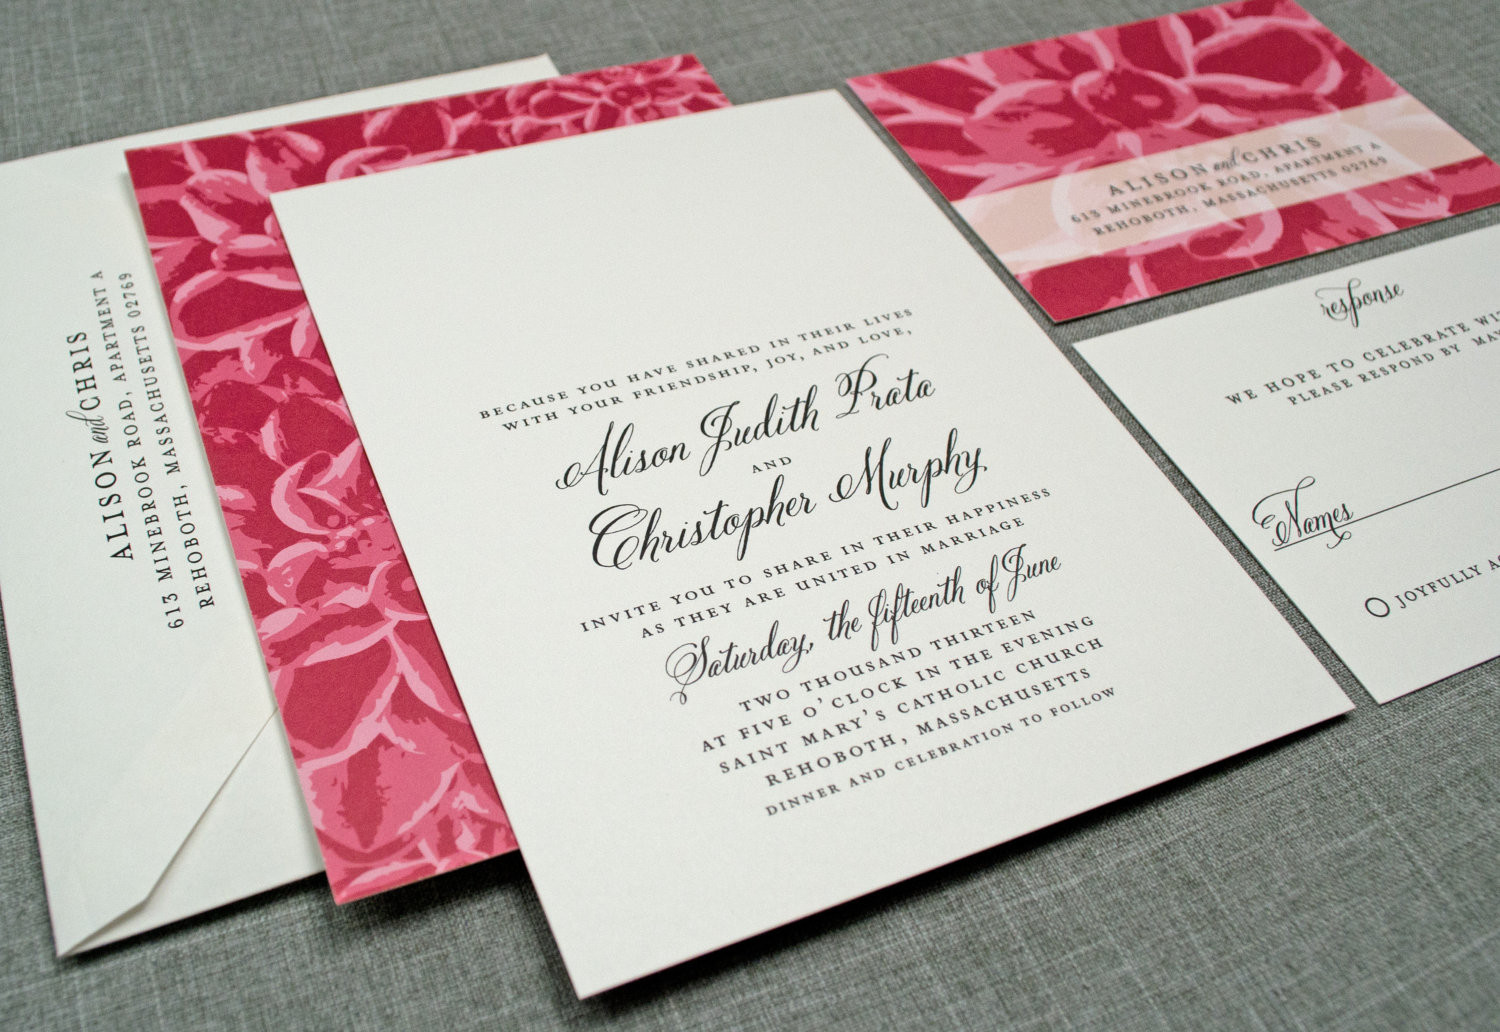 Wedding Invitations Pictures
 Do It Yourself Wedding Invitations Ideas